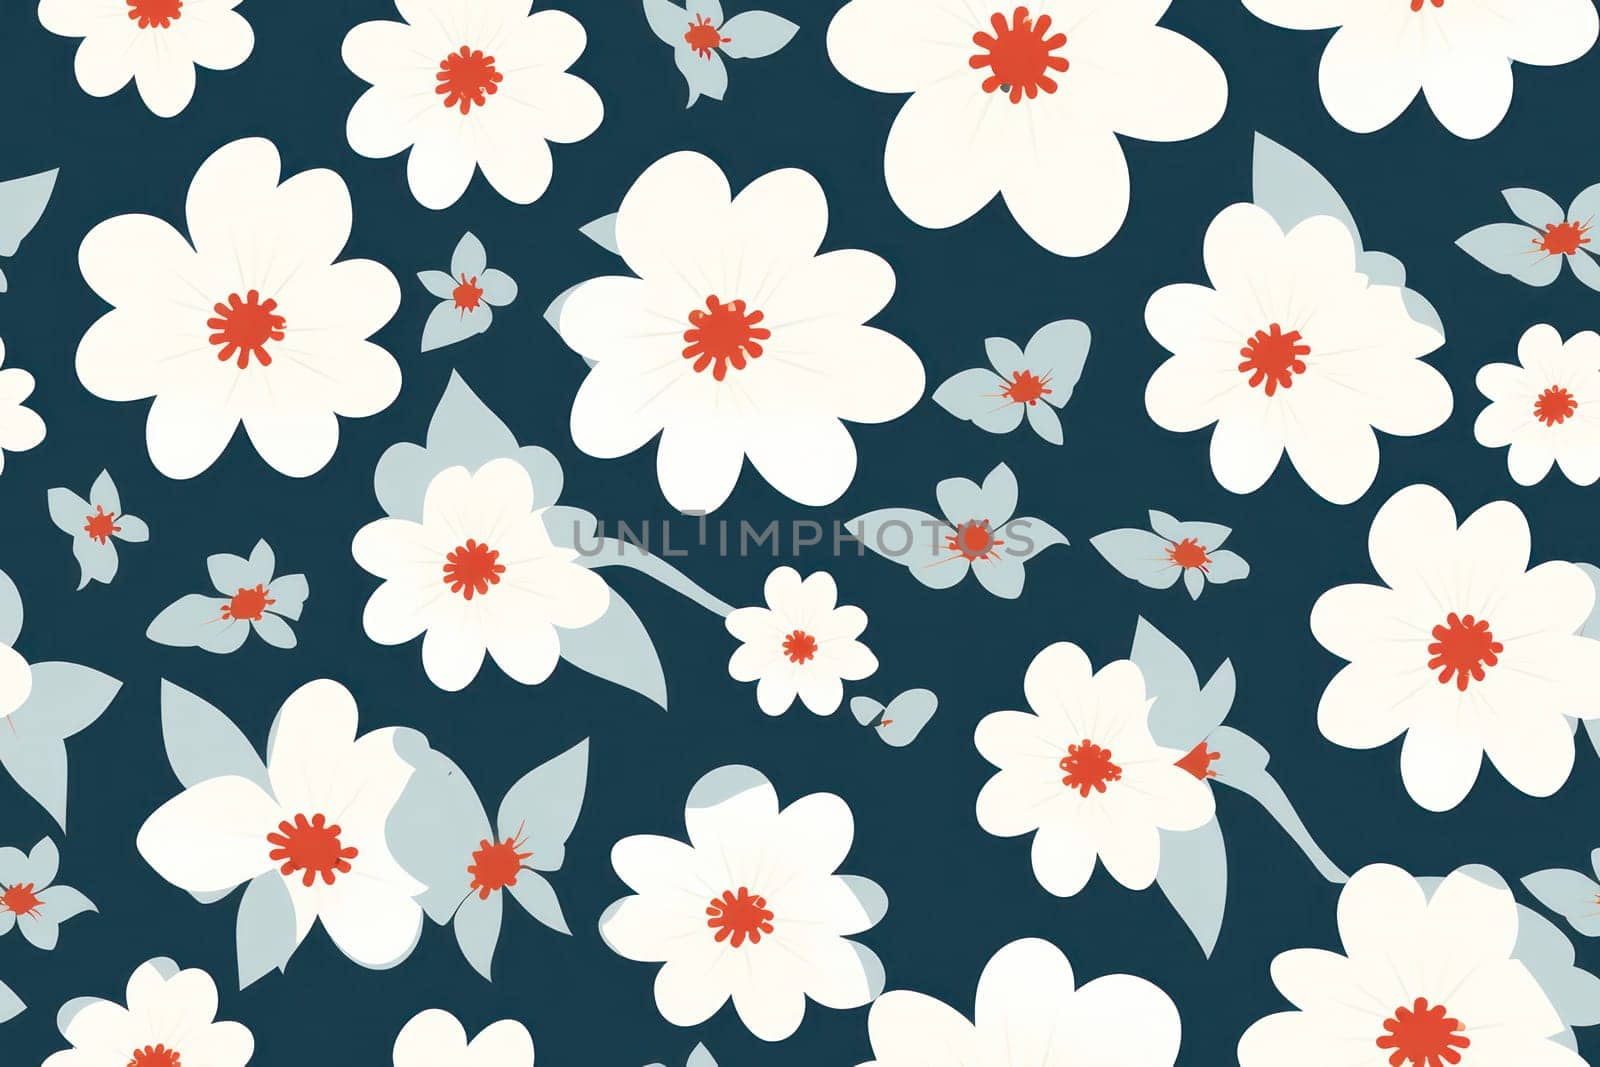 Blooming Floral Beauty: A Seamless Vintage Wallpaper Illustration of Pink Blossoms on a White Background